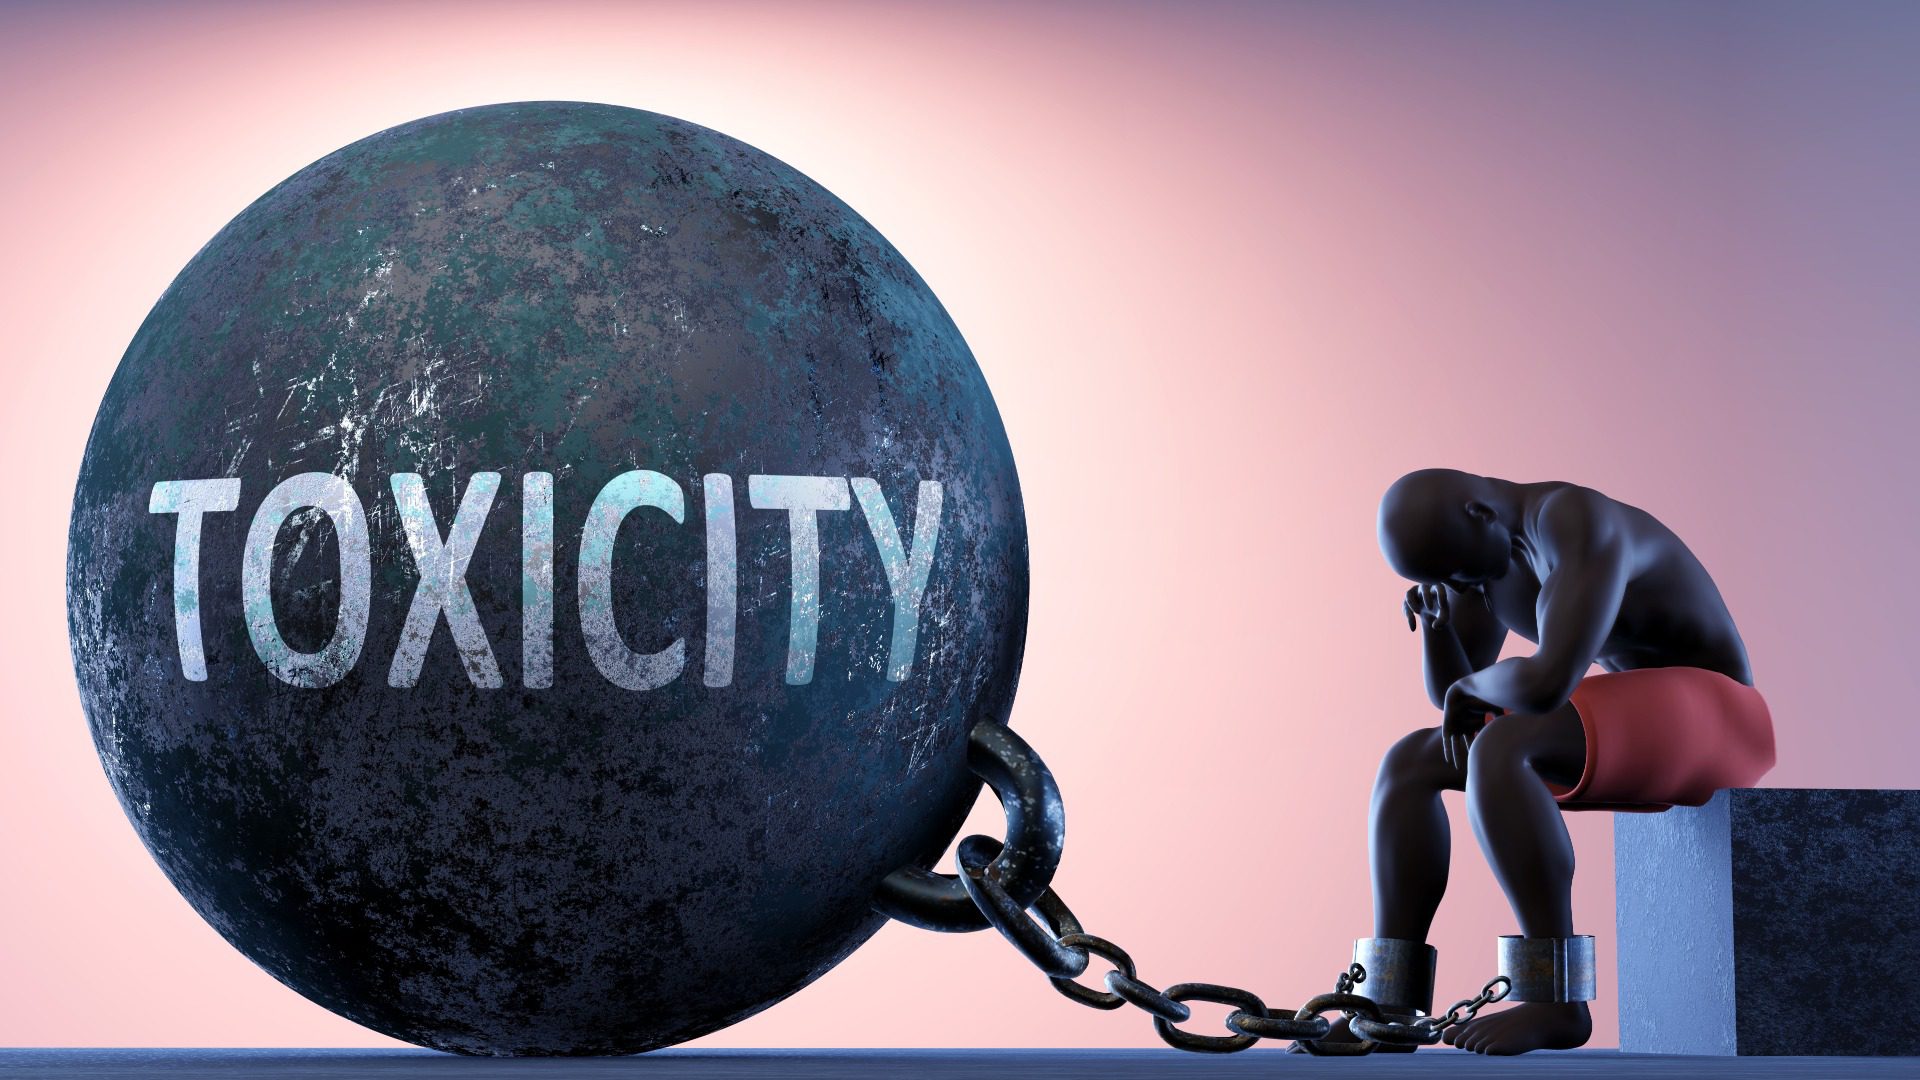 Toxicity as a heavy weight in life - symbolized by a person in chains attached to a prisoner ball to show that Toxicity can cause suffering, 3d illustration